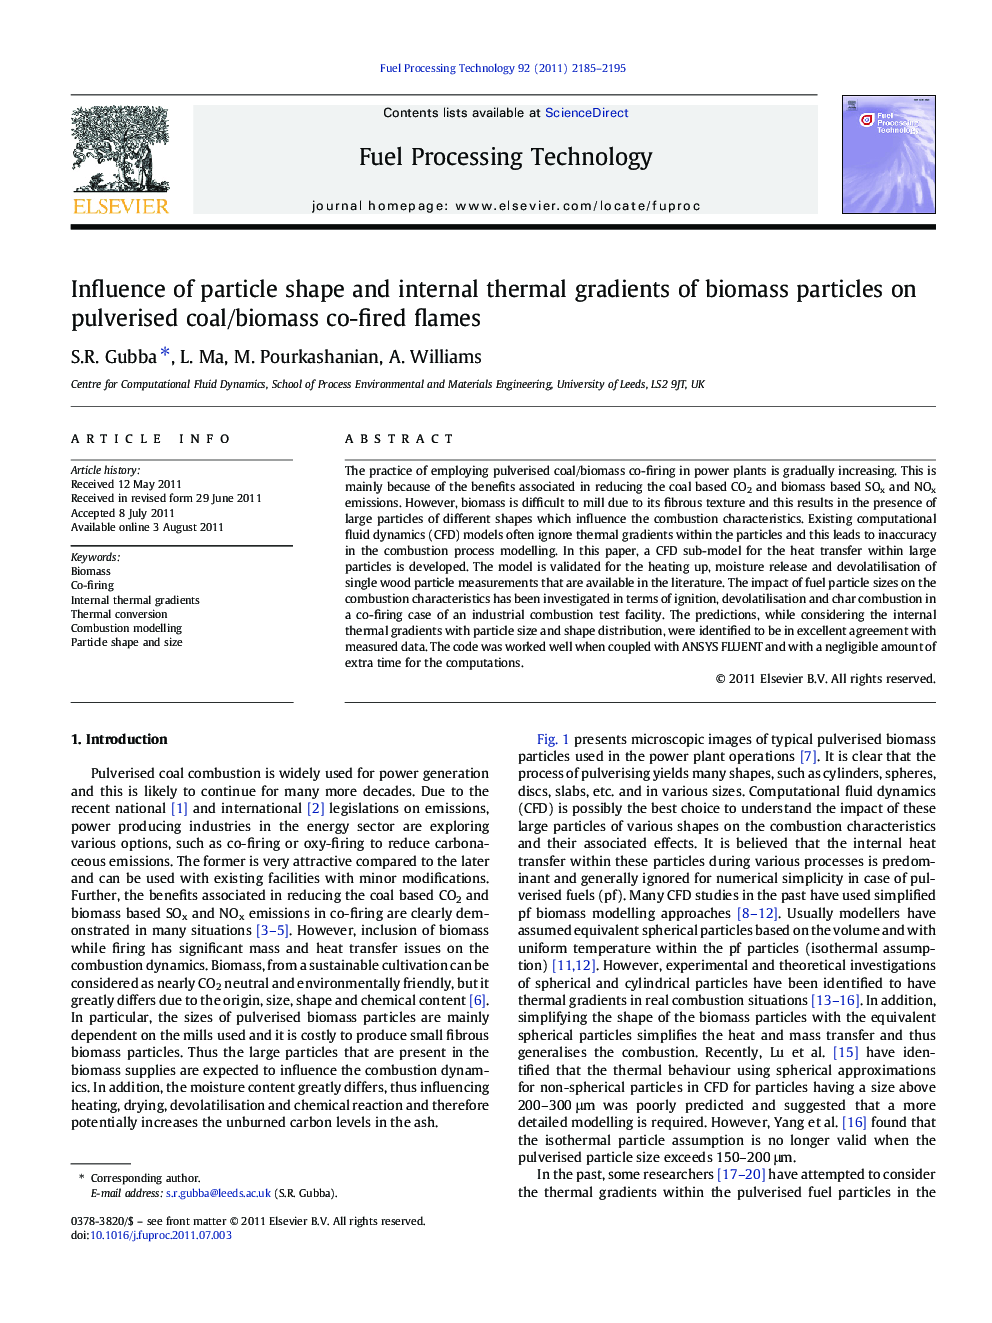 Influence of particle shape and internal thermal gradients of biomass particles on pulverised coal/biomass co-fired flames